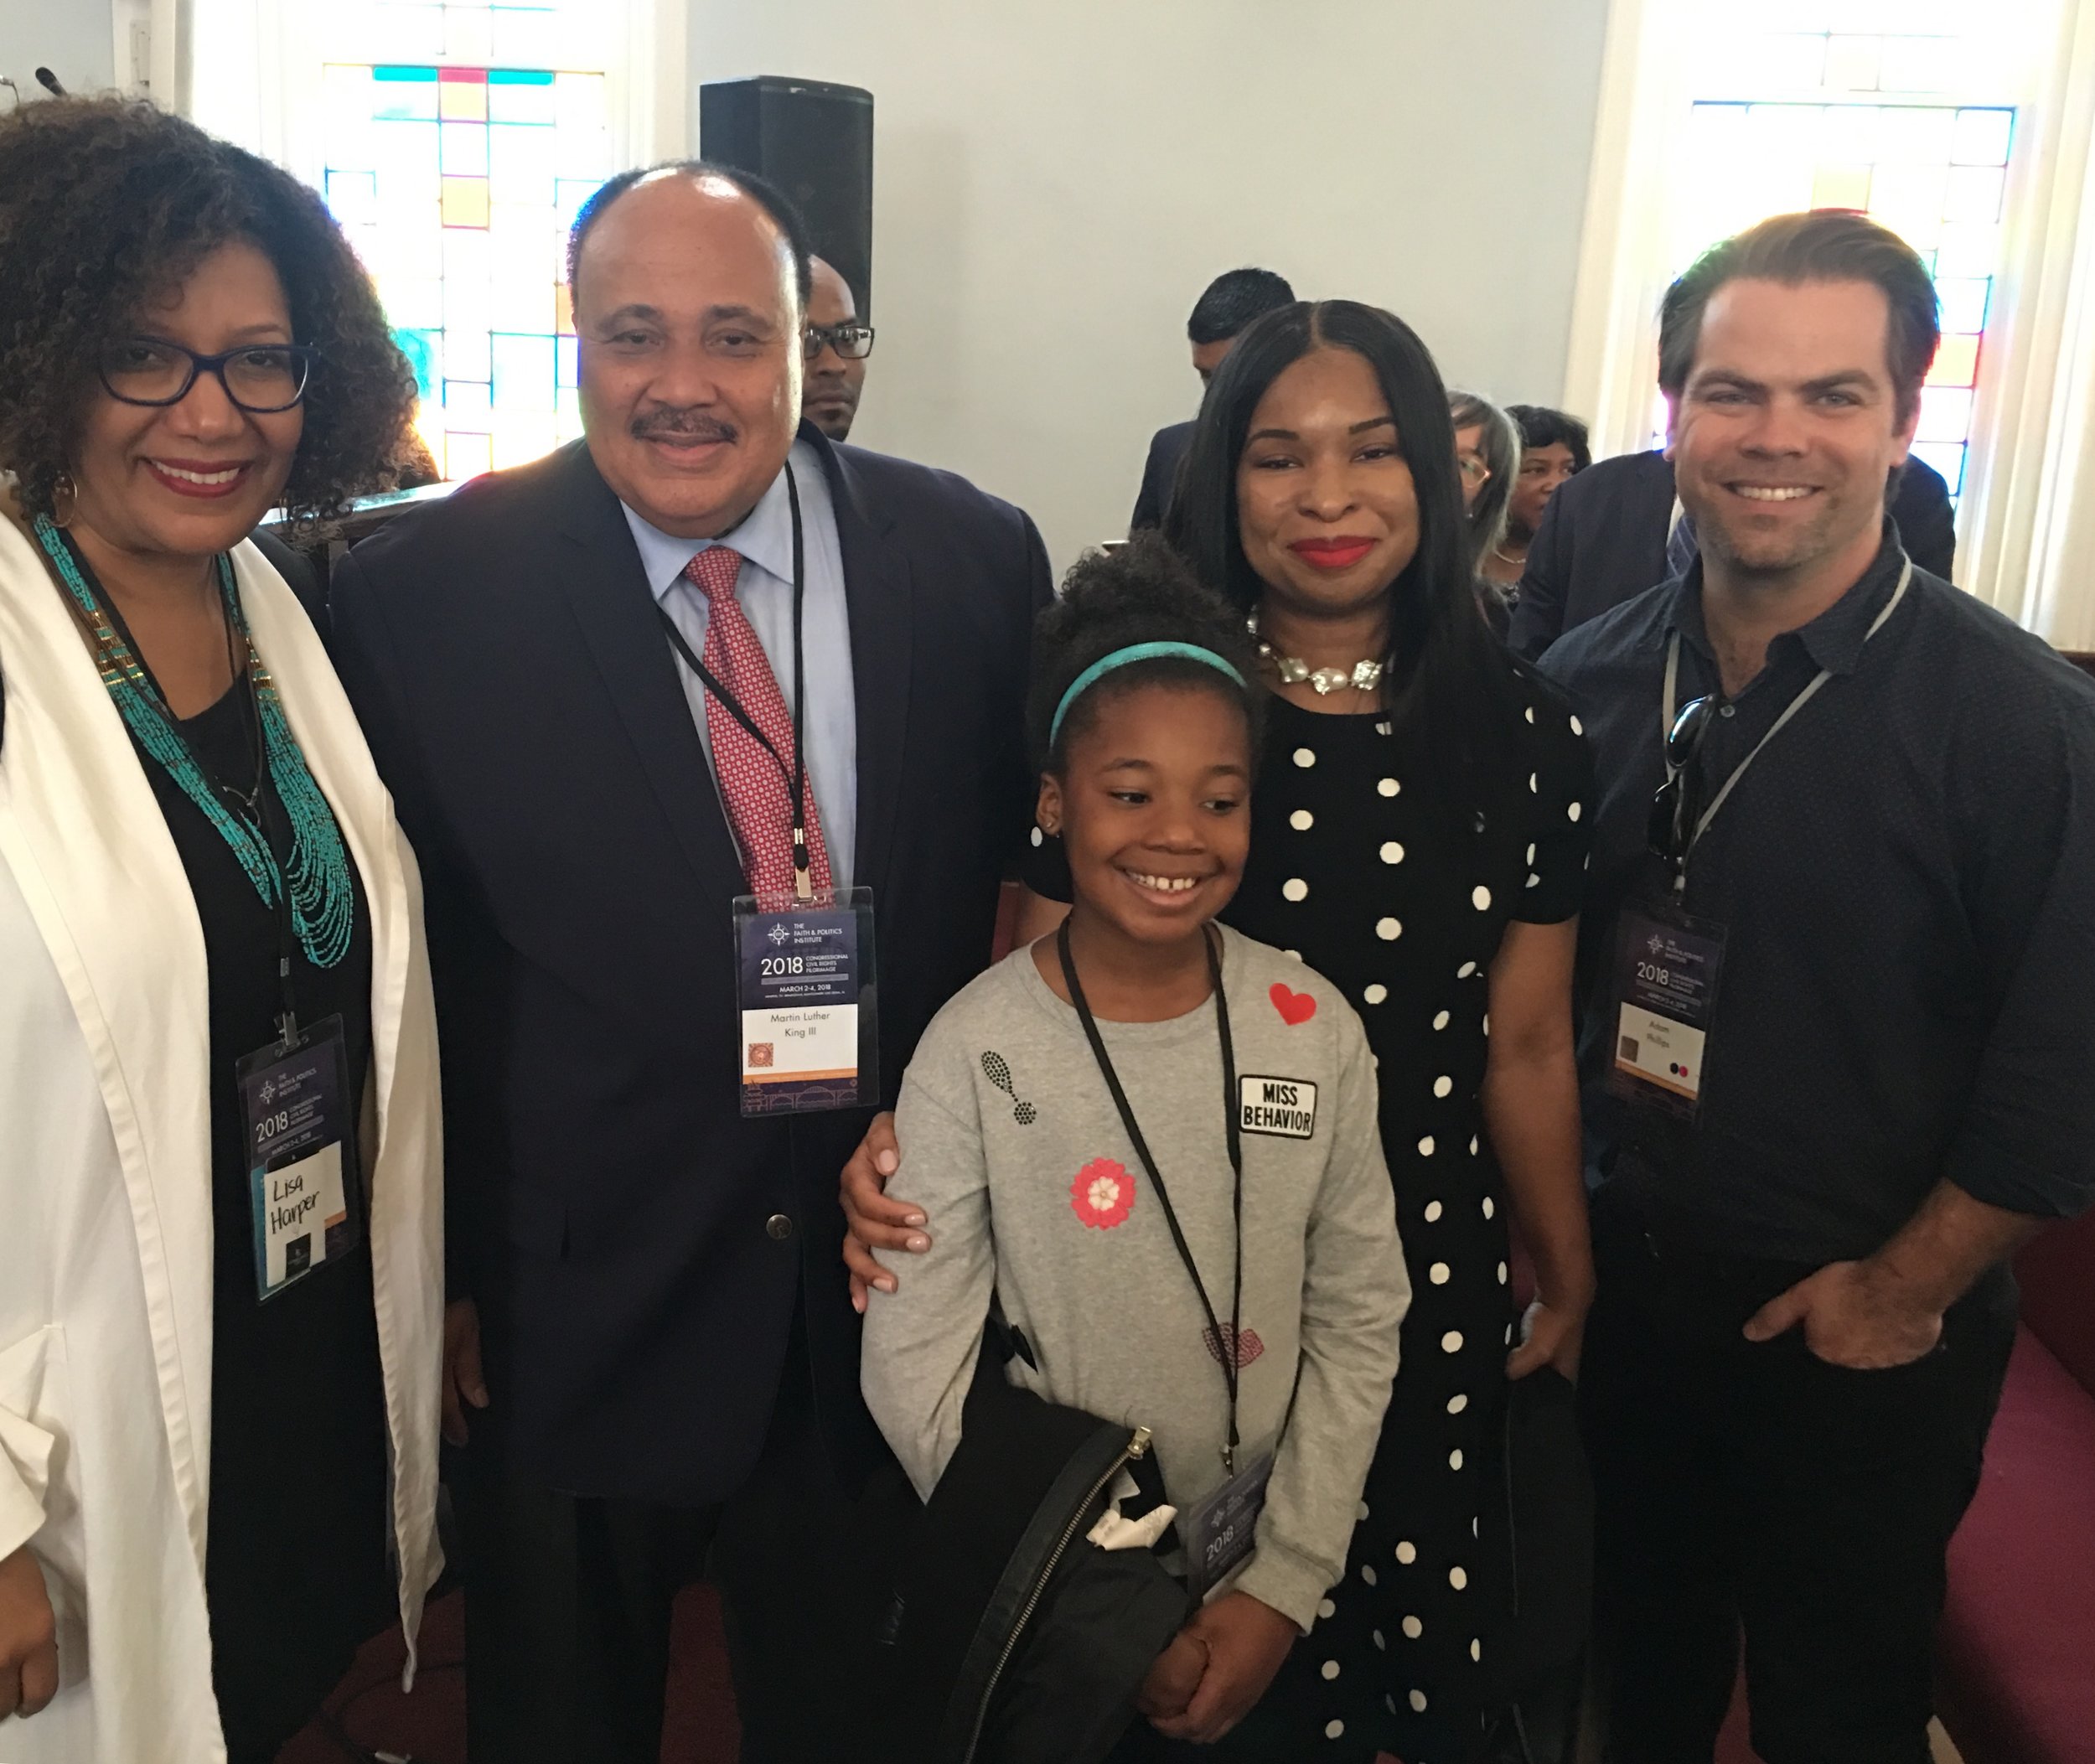  Lisa Sharon Harper and Adam Phillips with Martin Luther King III and his family 